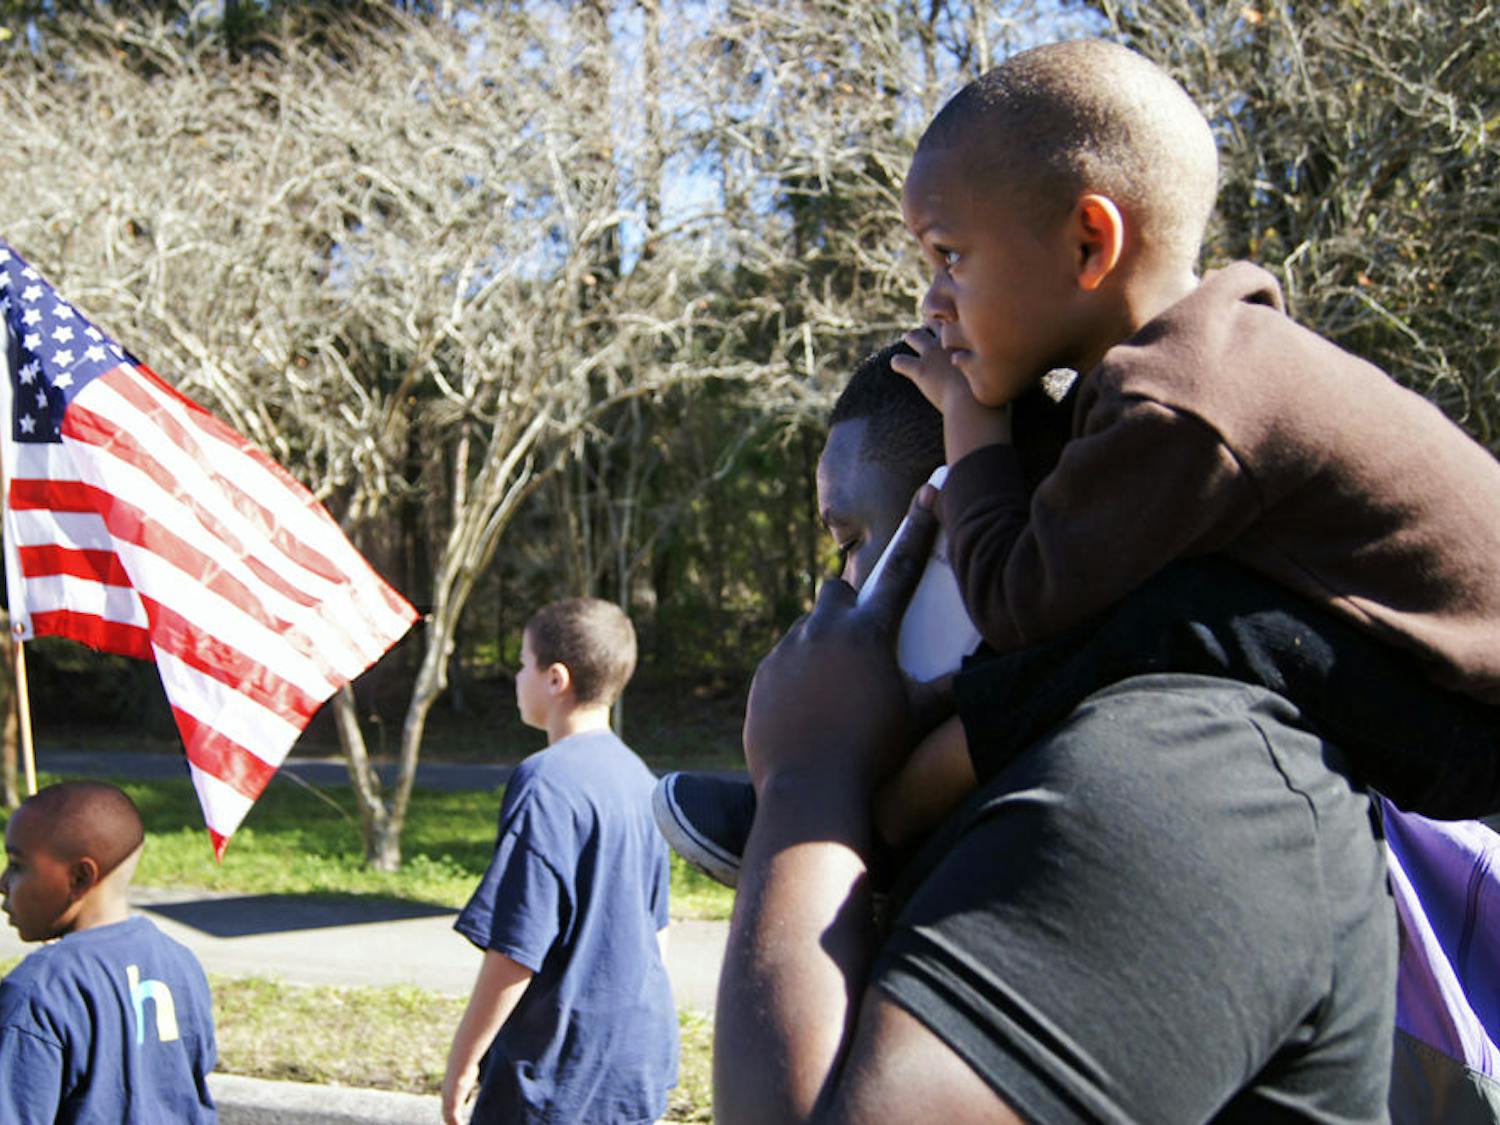 27-year-old Ushie Alungbe, a barber and dog breeder, carries his nephew, Kani Strickland, 3, on his shoulders as they take part in the King Celebration Annual Commemorative March held Monday in honor of Dr. Martin Luther King Jr.